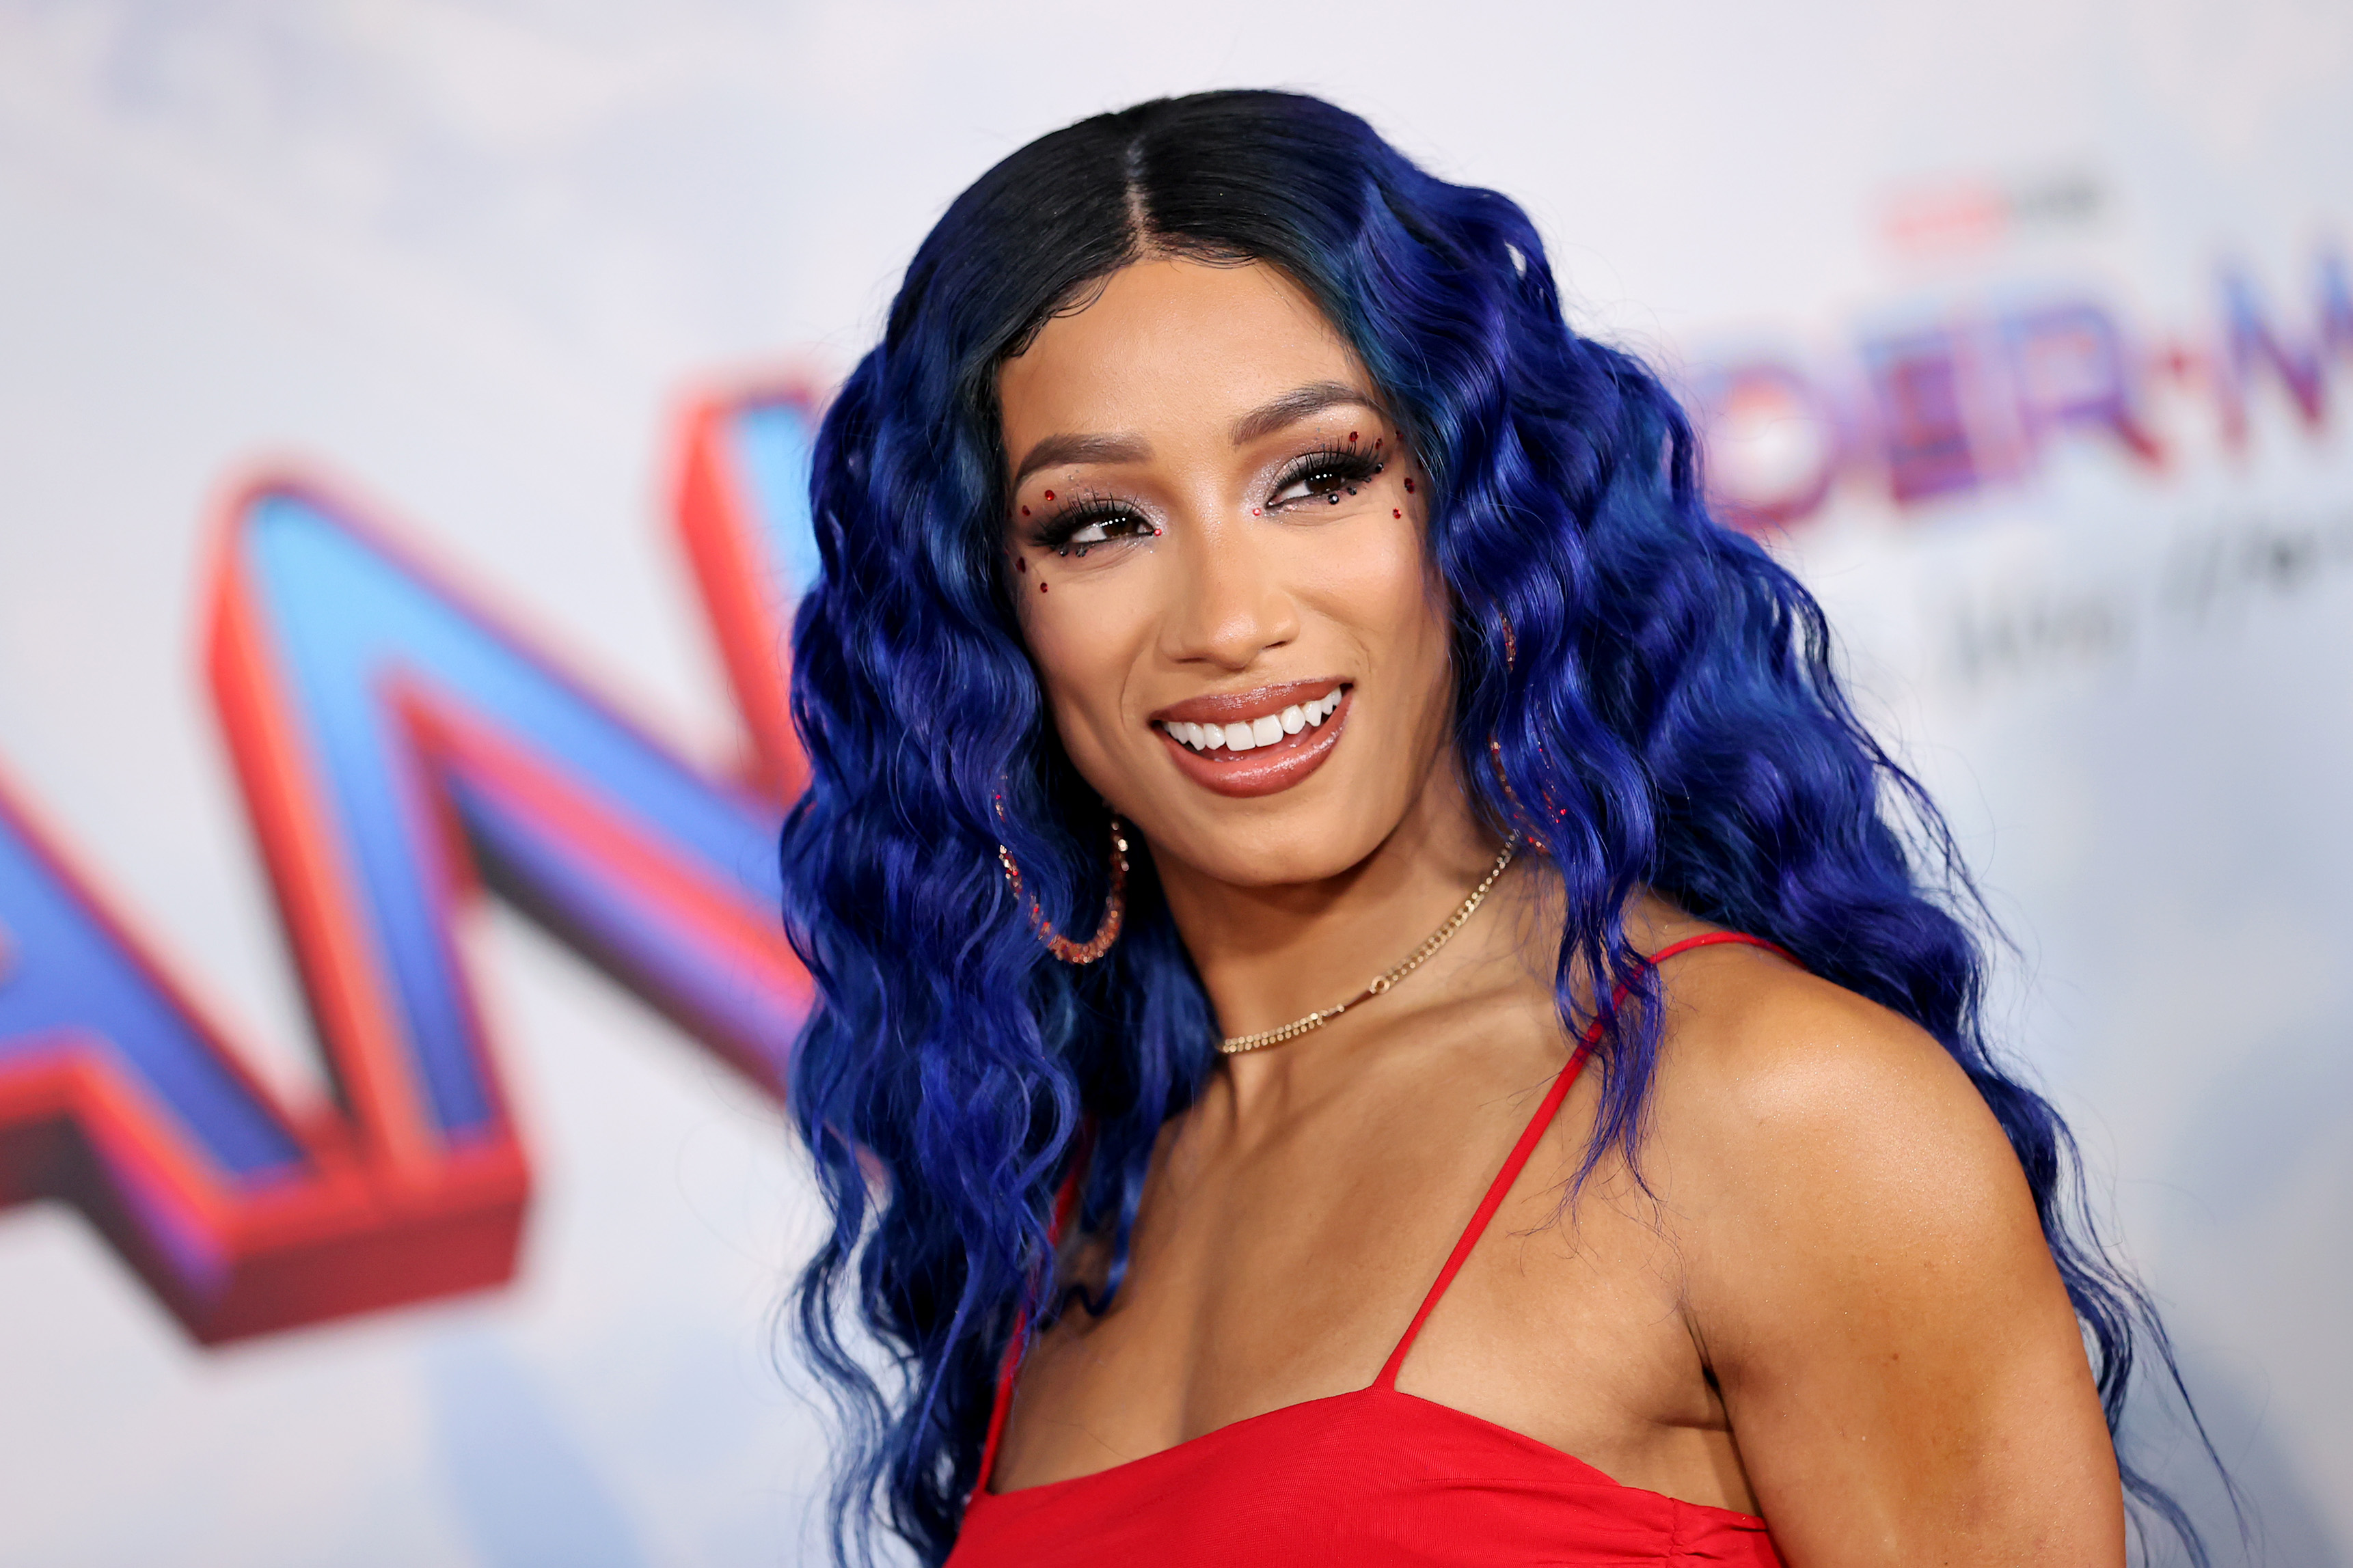 WWE Rumors on Sasha Banks, Naomi, Vince McMahon, Money in the Bank; Cody Speaks Out